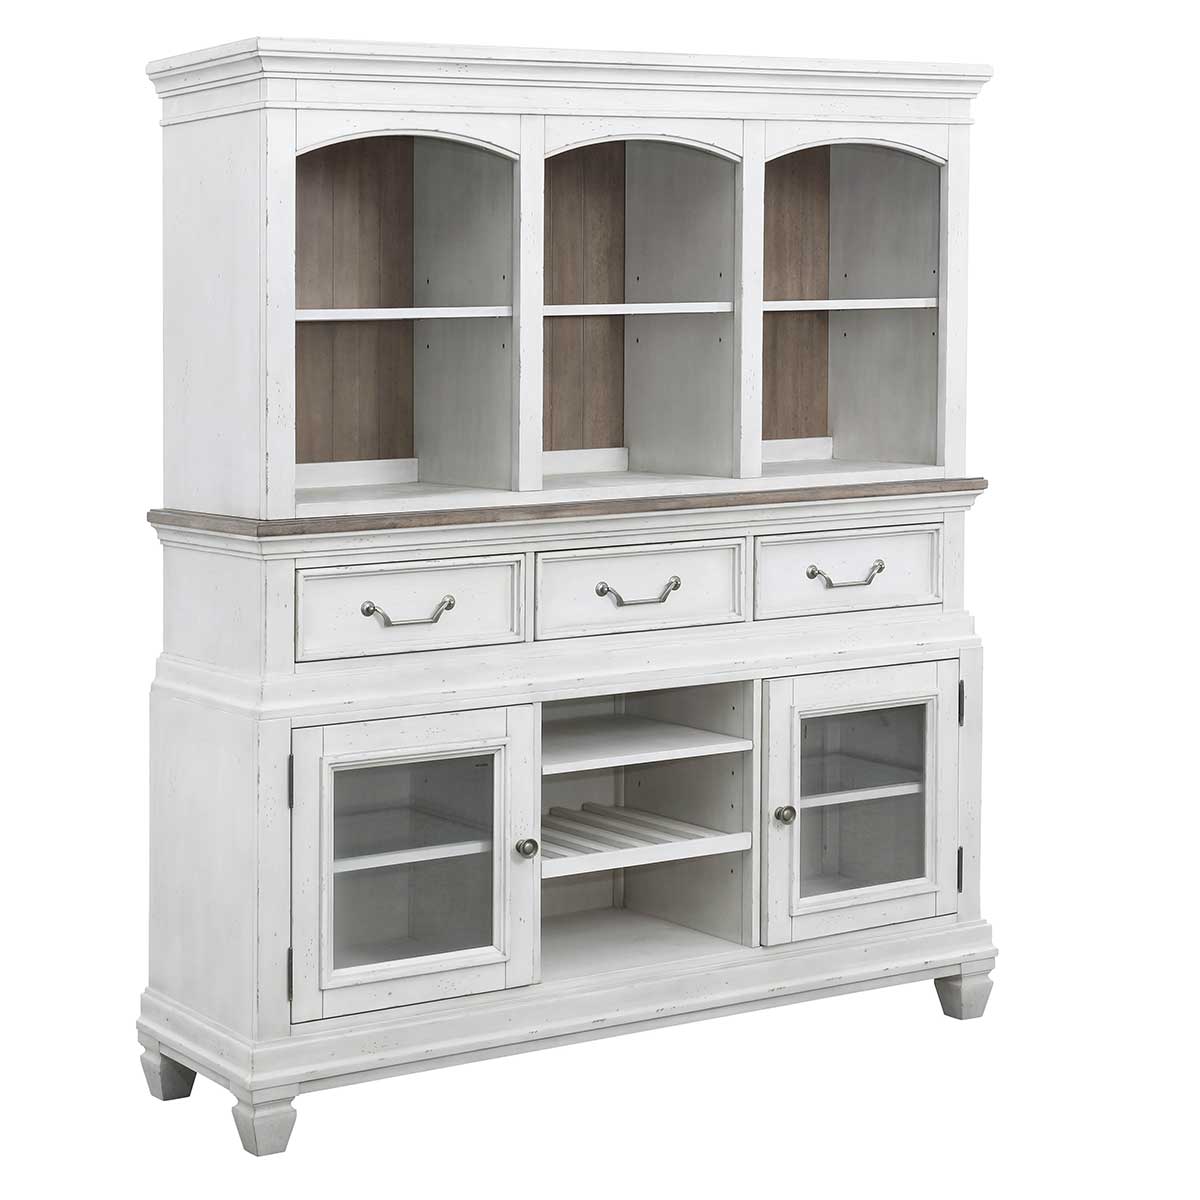 White country dining hutch with glass doors